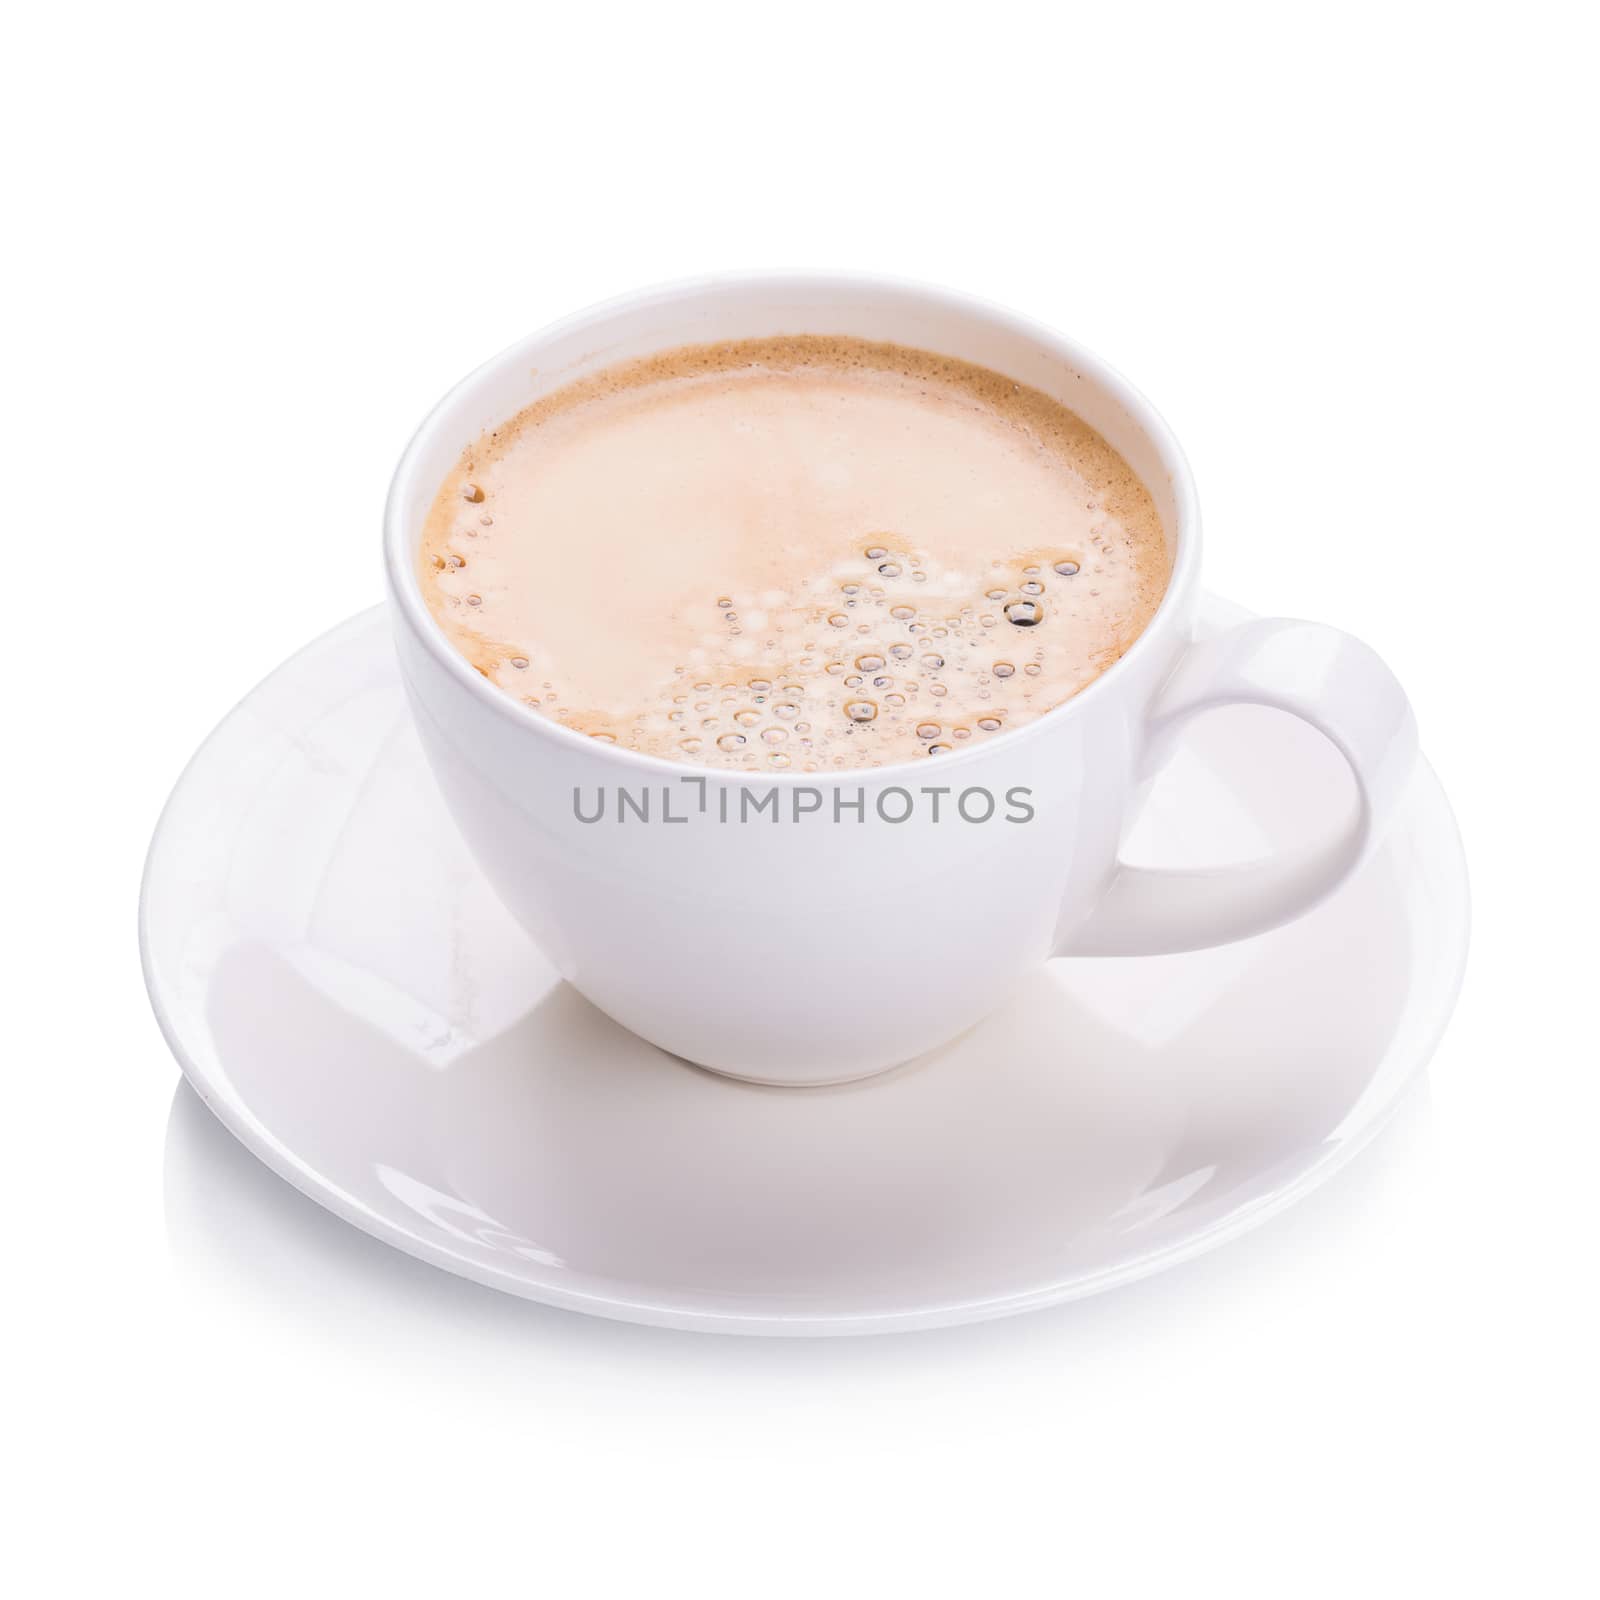 Hot americano coffee in white glass on white background by kaiskynet